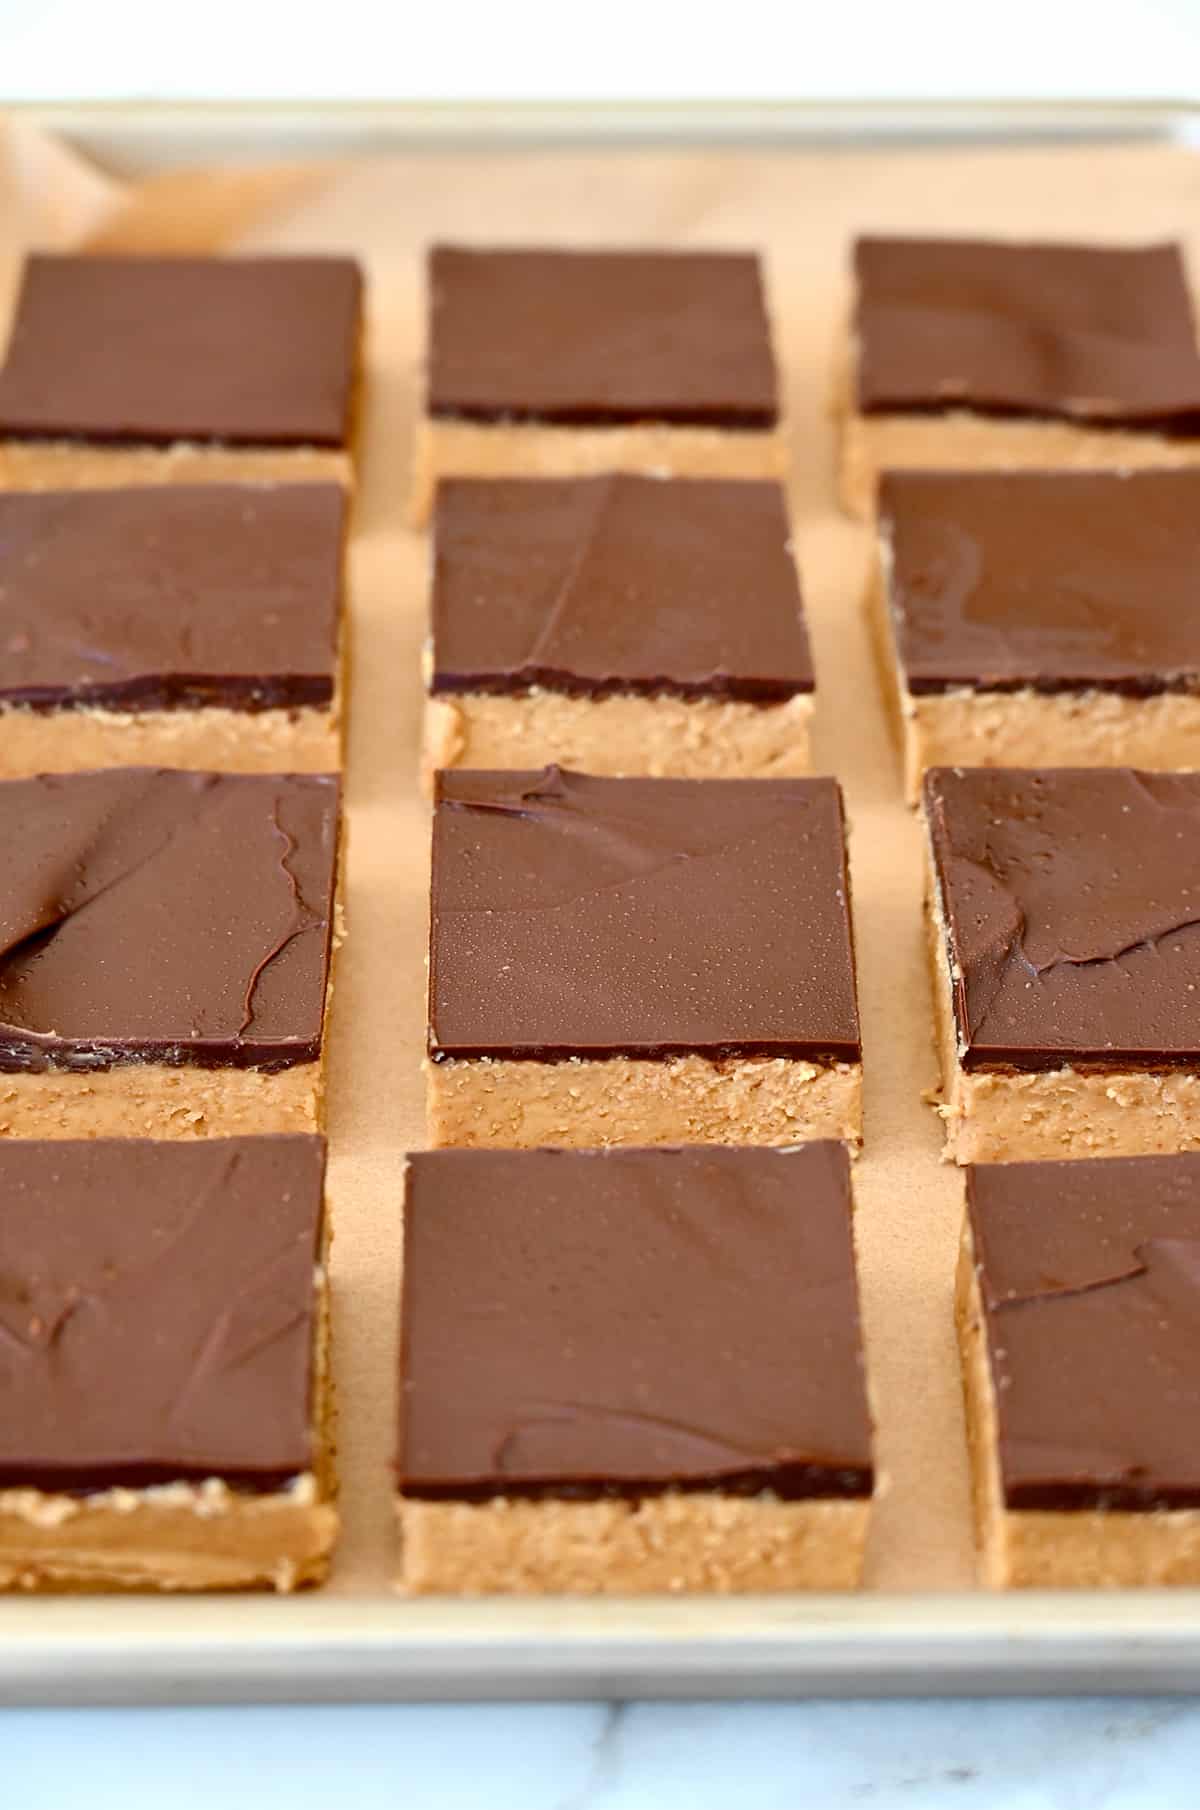 Chocolate peanut butter bars sliced into perfect squares on a baking sheet.